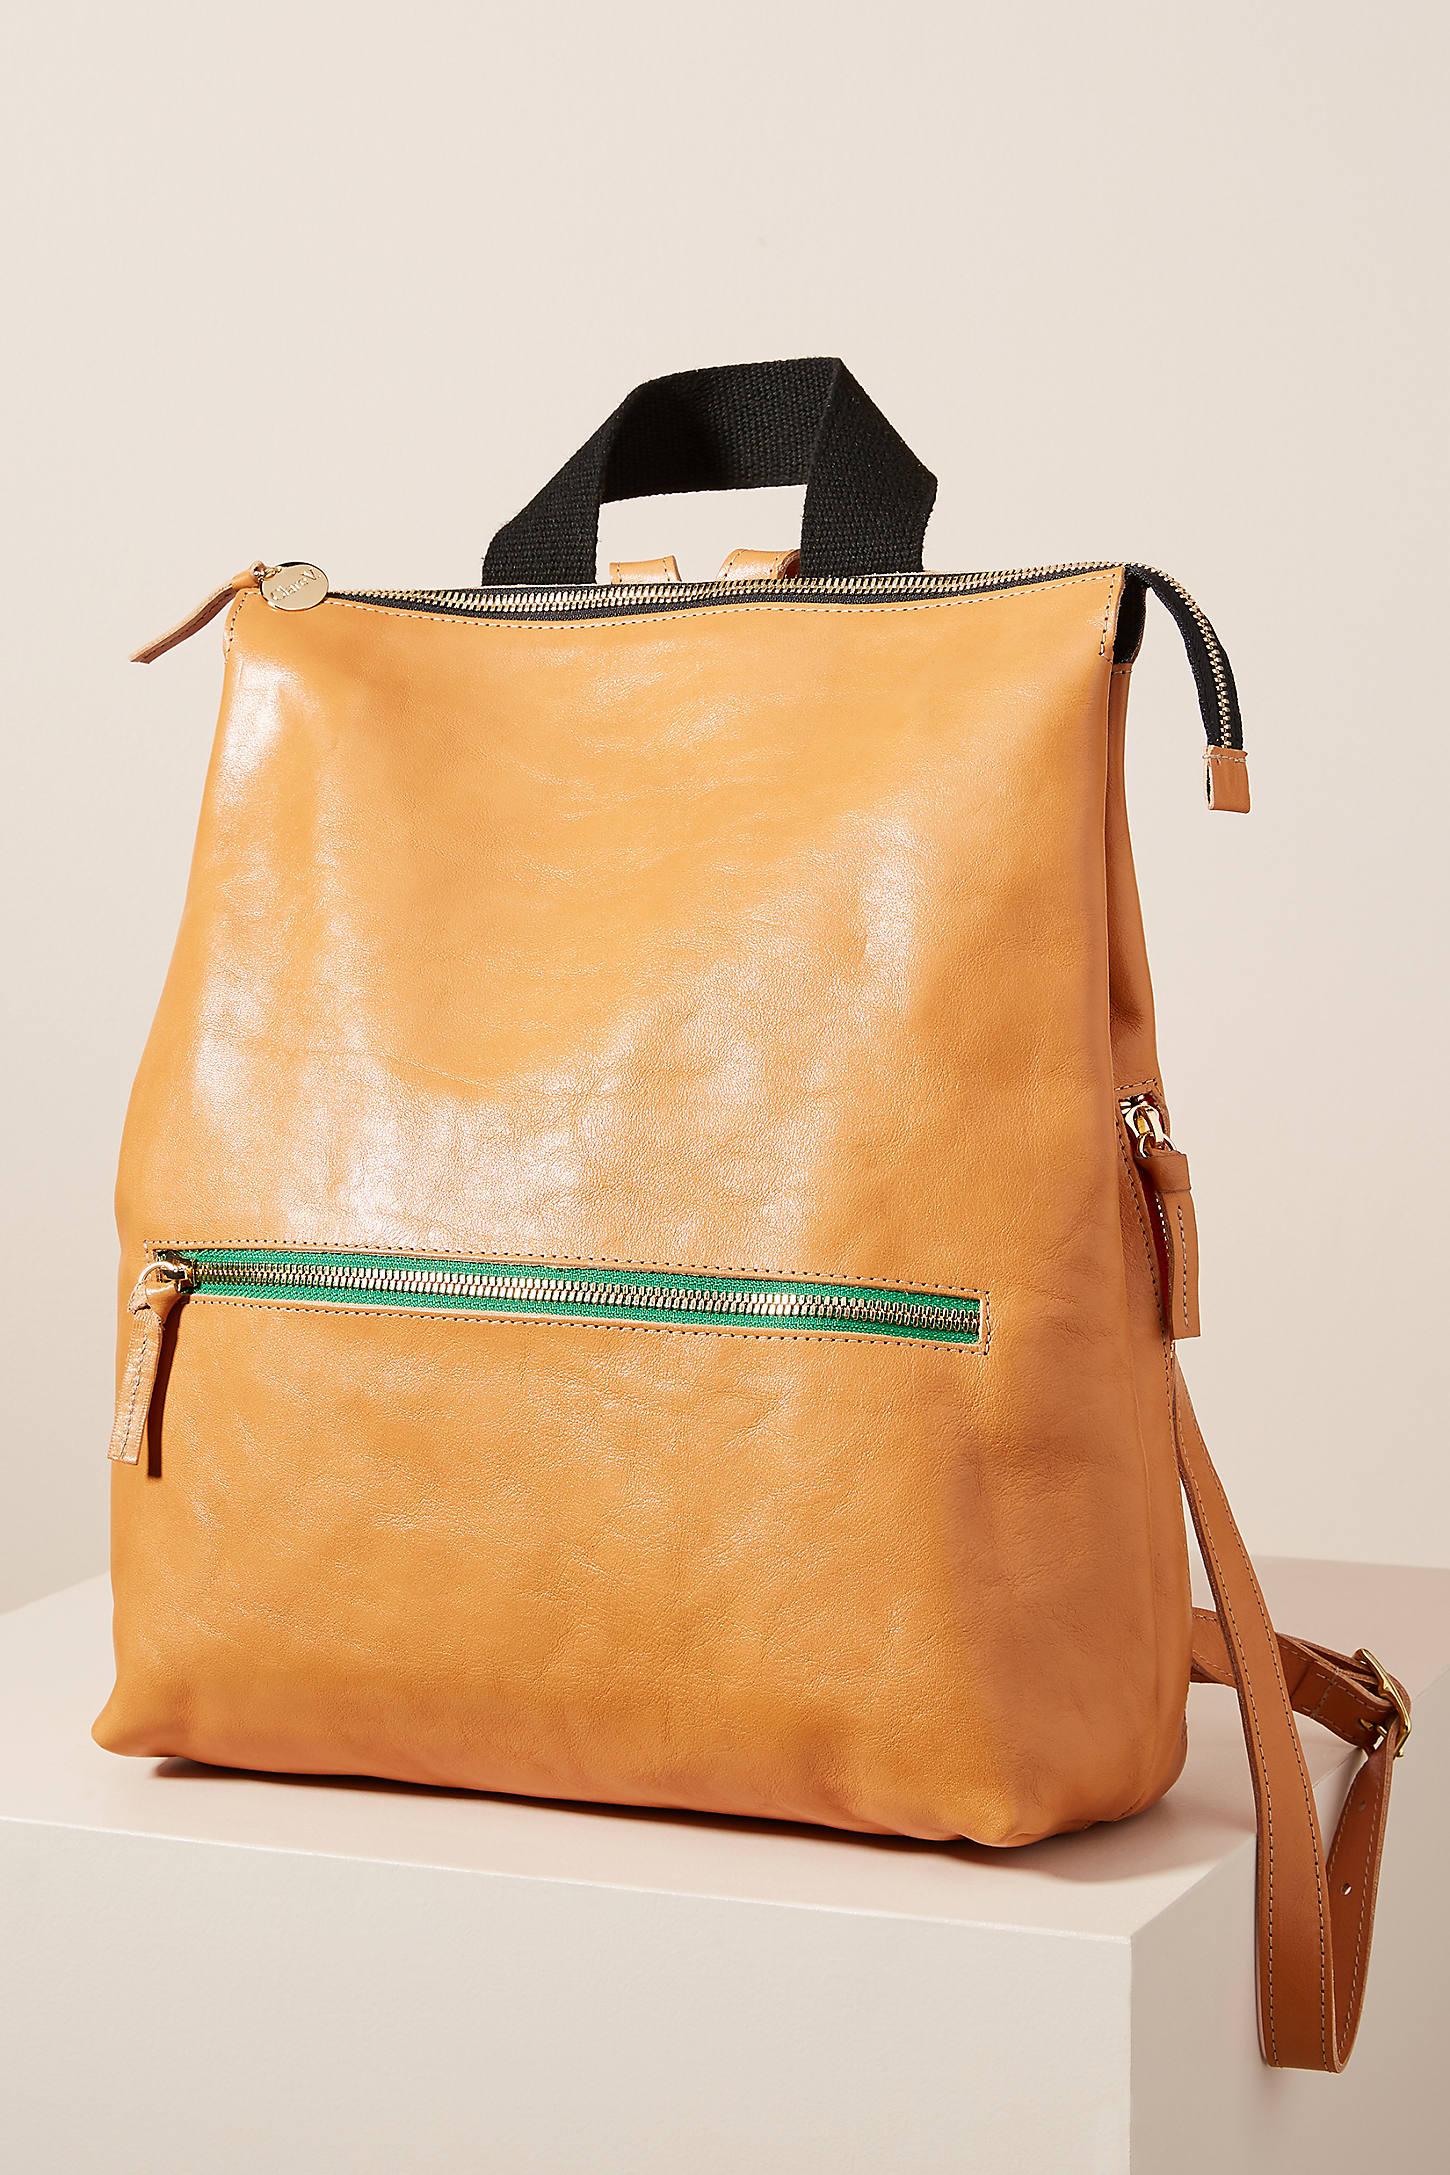 clare v White leather Remi backpack Milaura